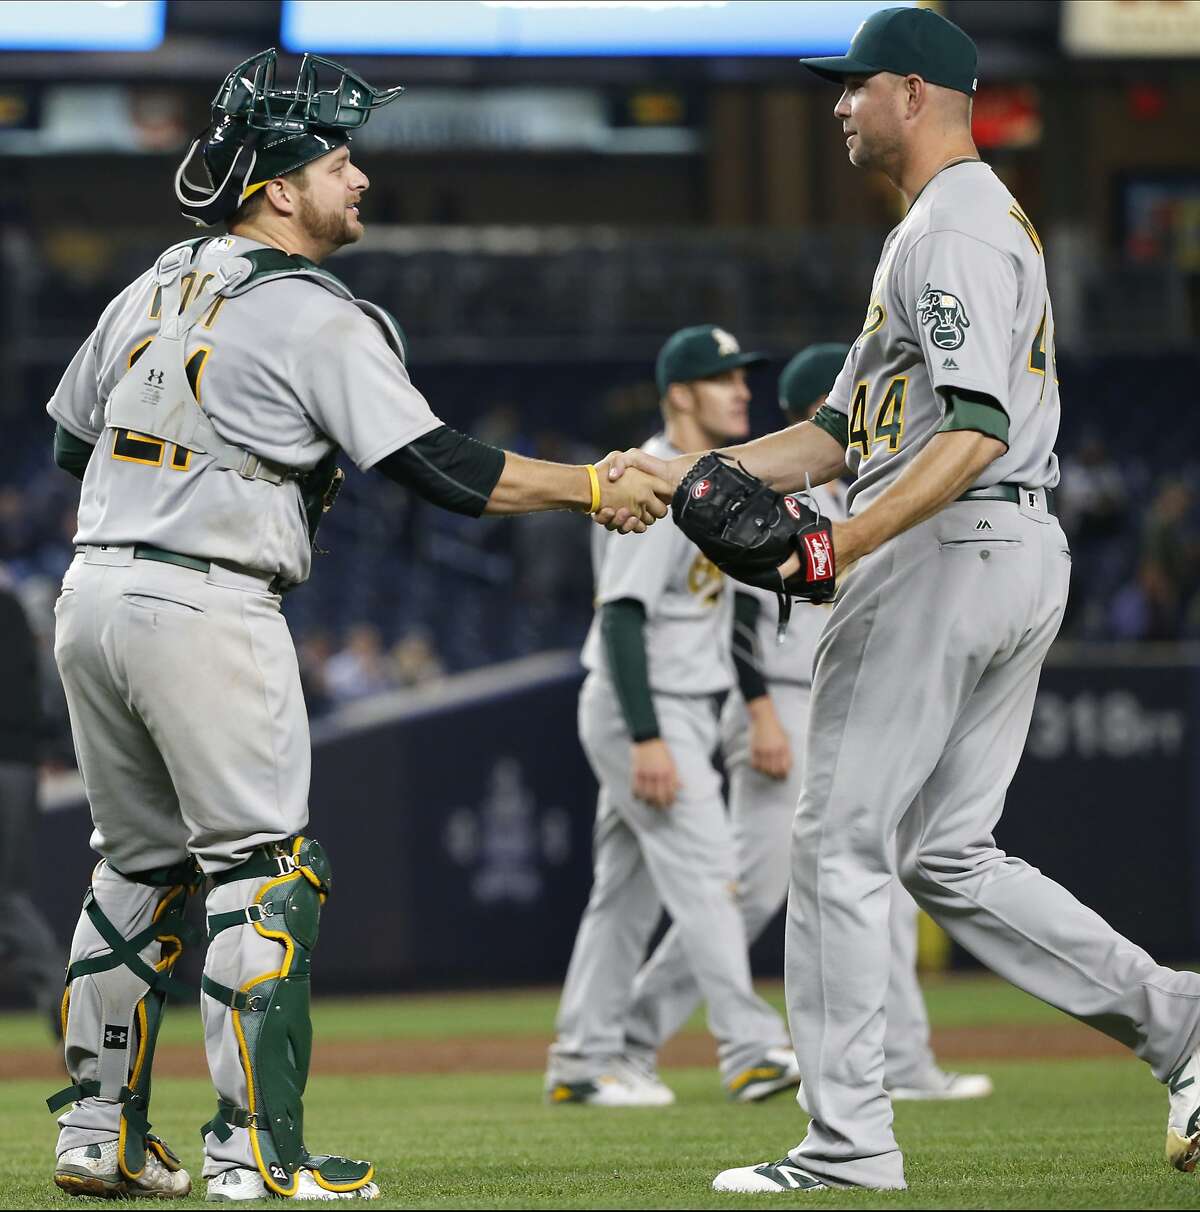 Oakland Athletics catcher Stephen Vogt, left, congratulates relief pitcher Ryan Madson (44) after the Athletics' 7-3 victory over the New York Yankees in a baseball game in New York, Thursday, April 21, 2016. (AP Photo/Kathy Willens)